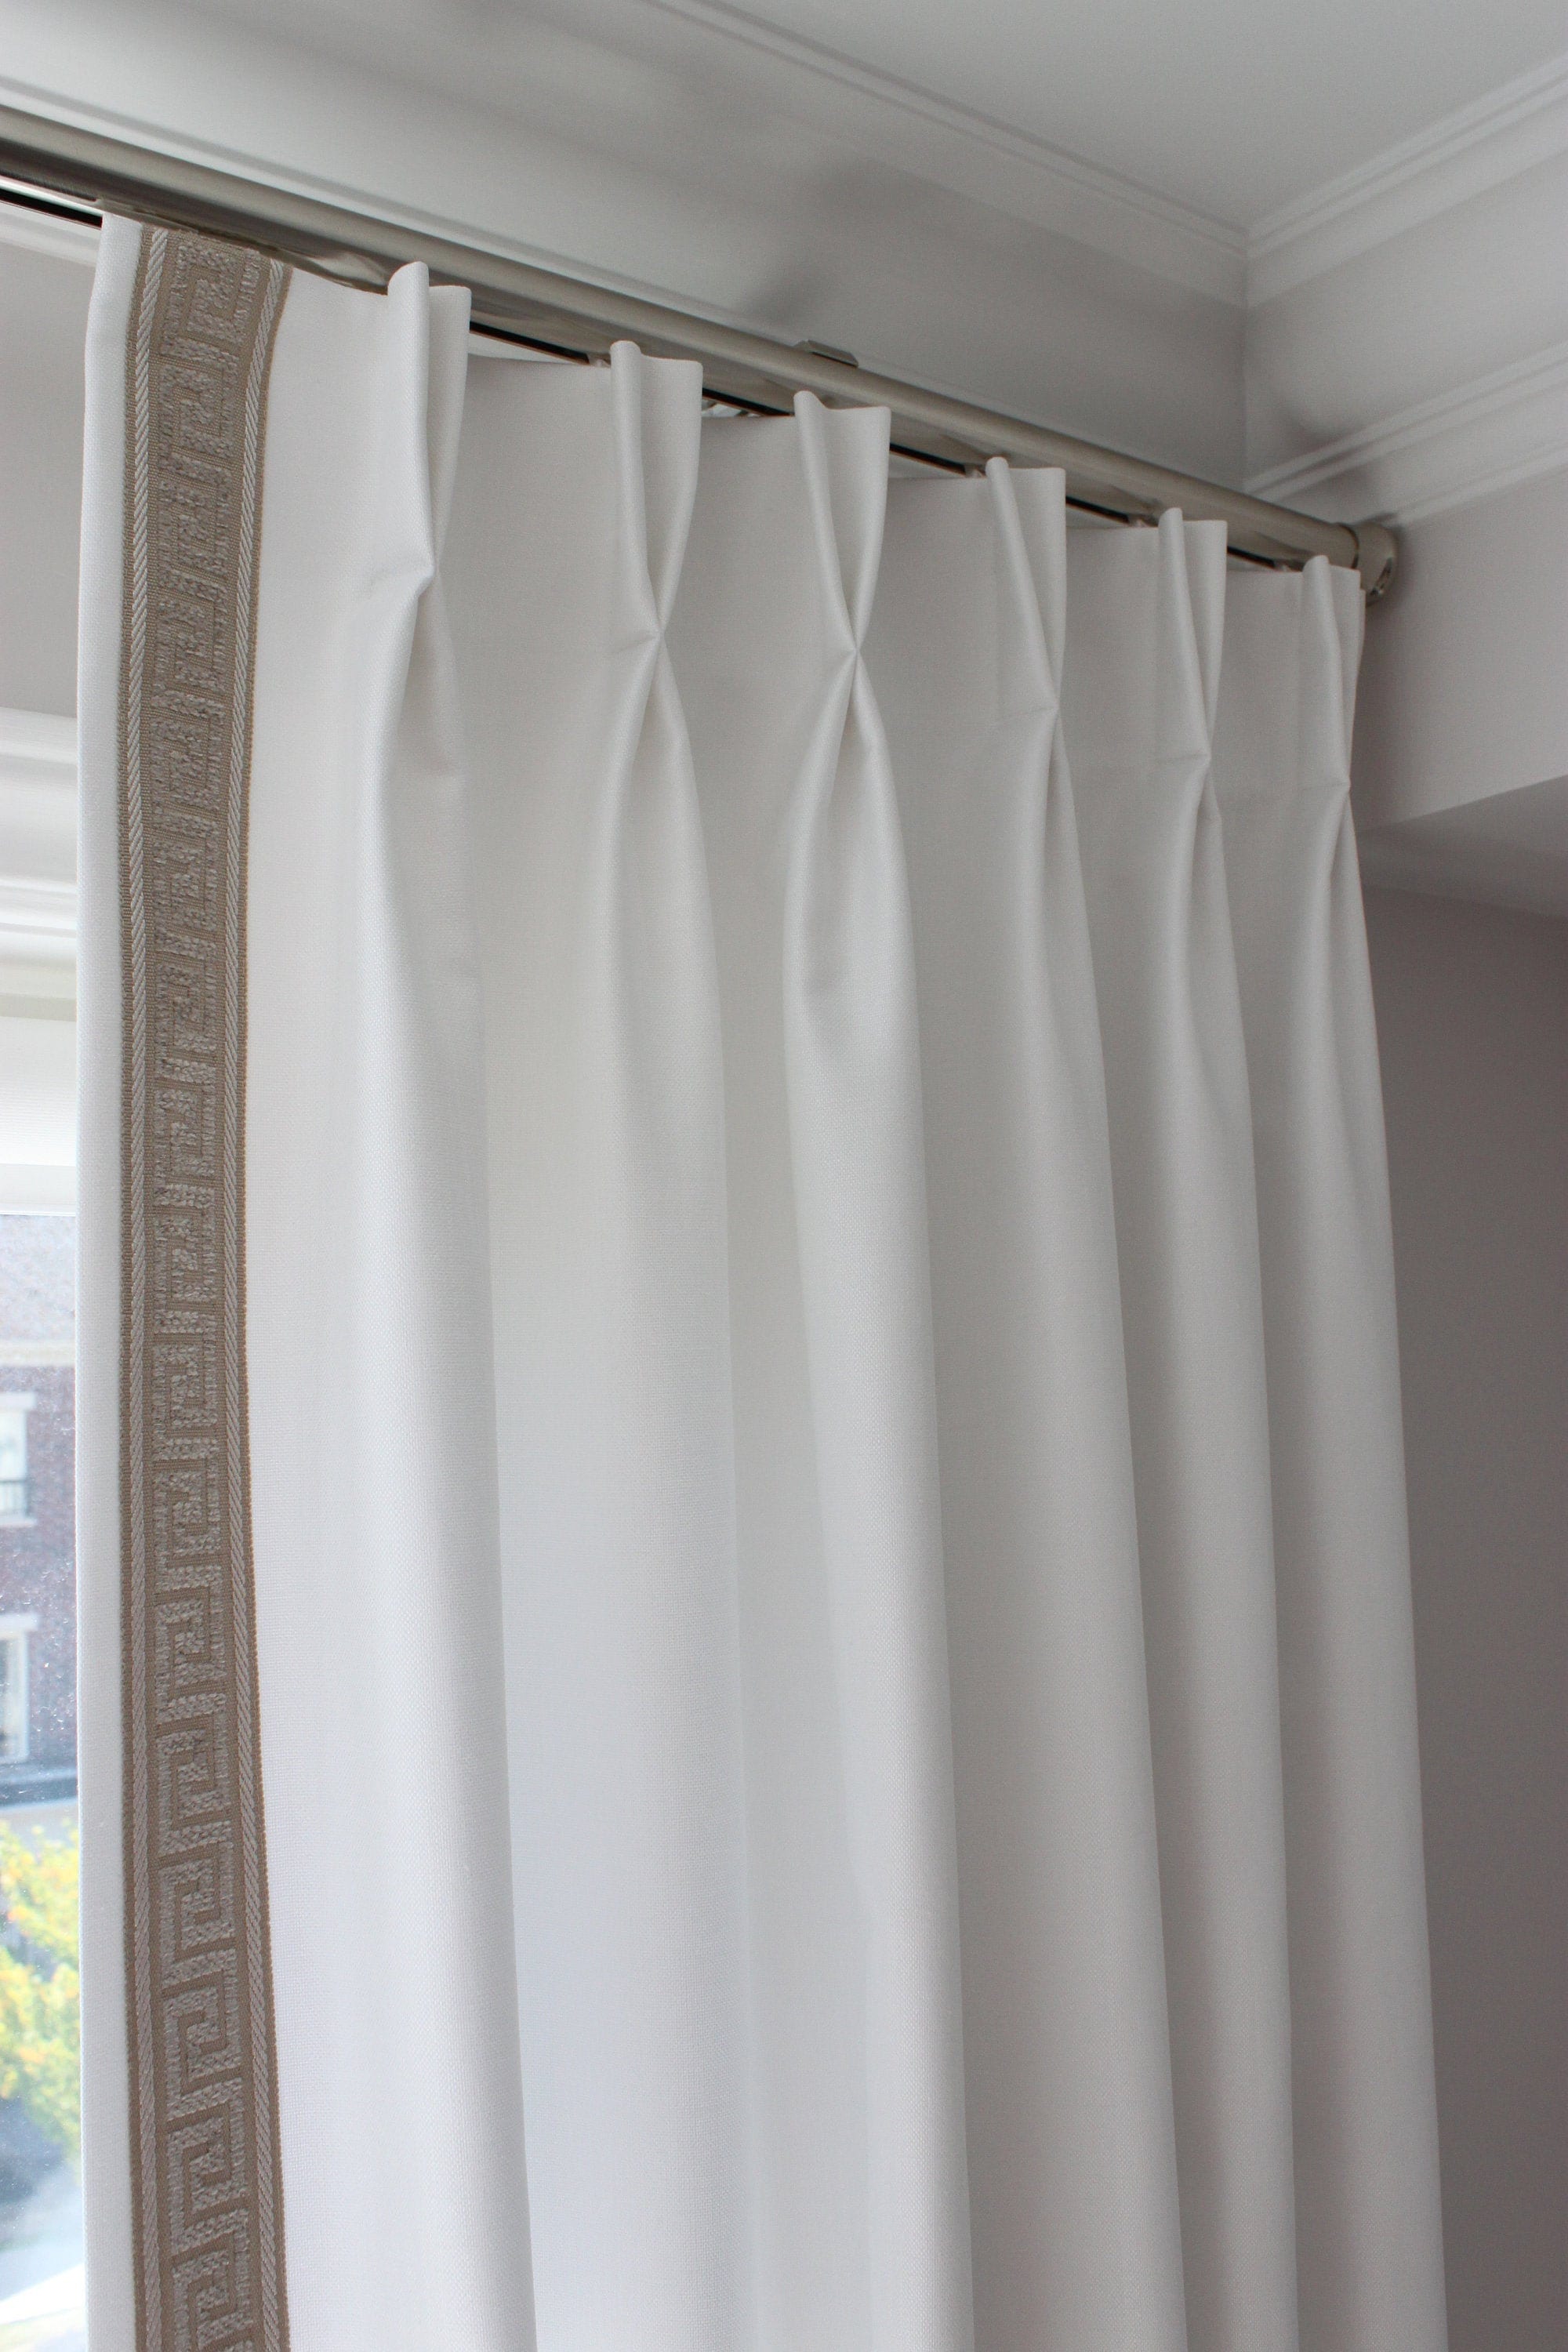 Curtains With Ribbon Trims, Custom Draperies With Border Trim